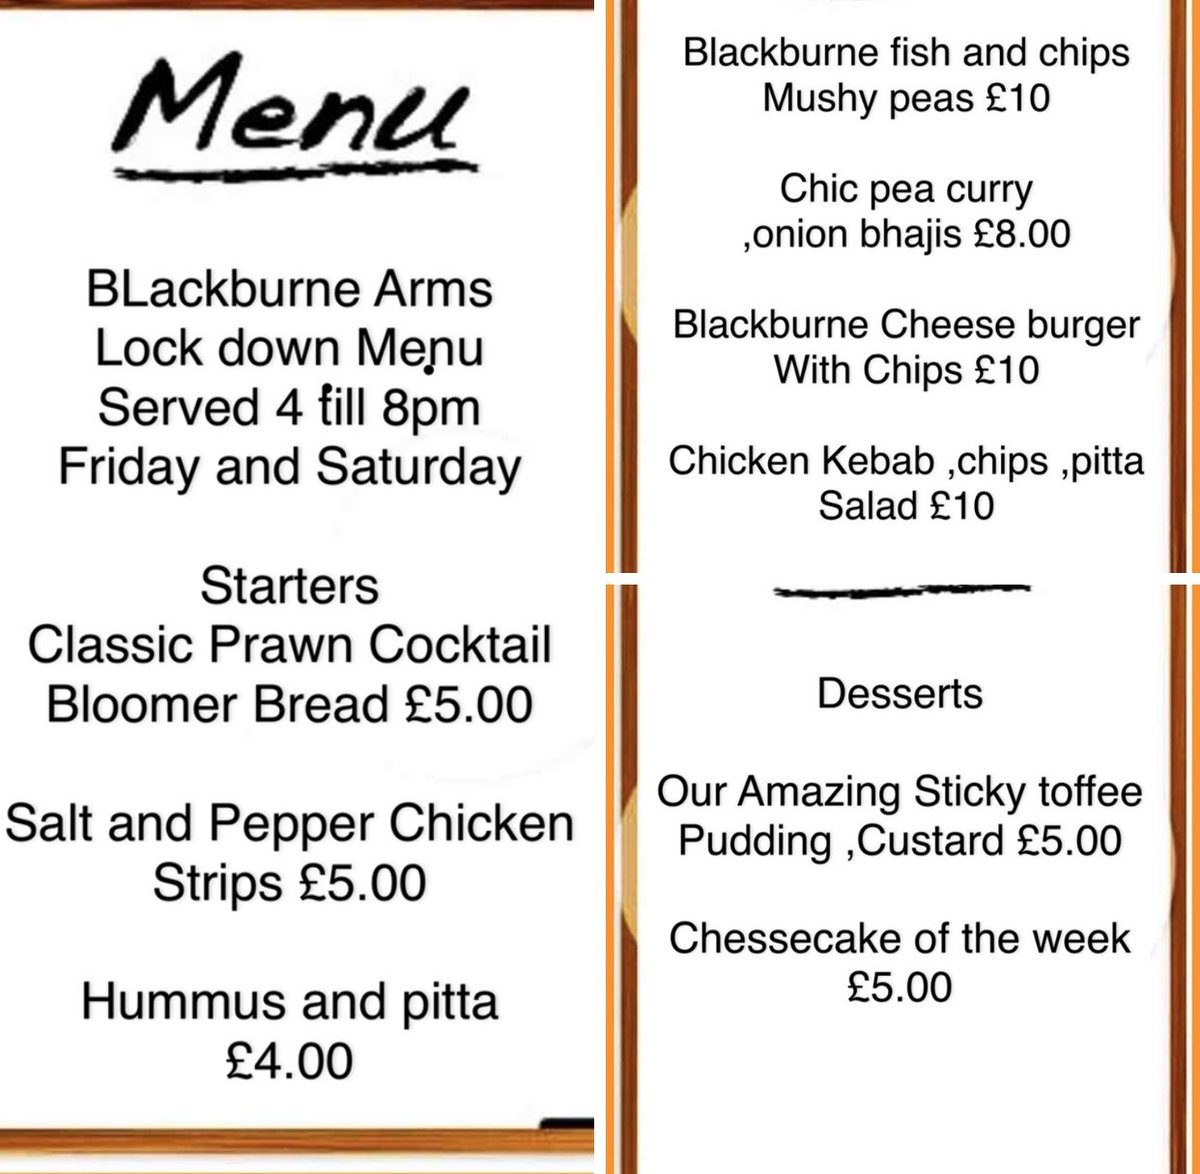 Blackburne weekend Menu is now ready to
Order 
Call 0151 7099159 to order yours
Pick up and delivery 
Hope your all well and Safe ,we miss you all x
#supportlocalbusiness  #foodliverpool #takeaway #liverpool #freshfood 
#foodtoyourdoor #liverpoolscan  #foodie #georgianquarter